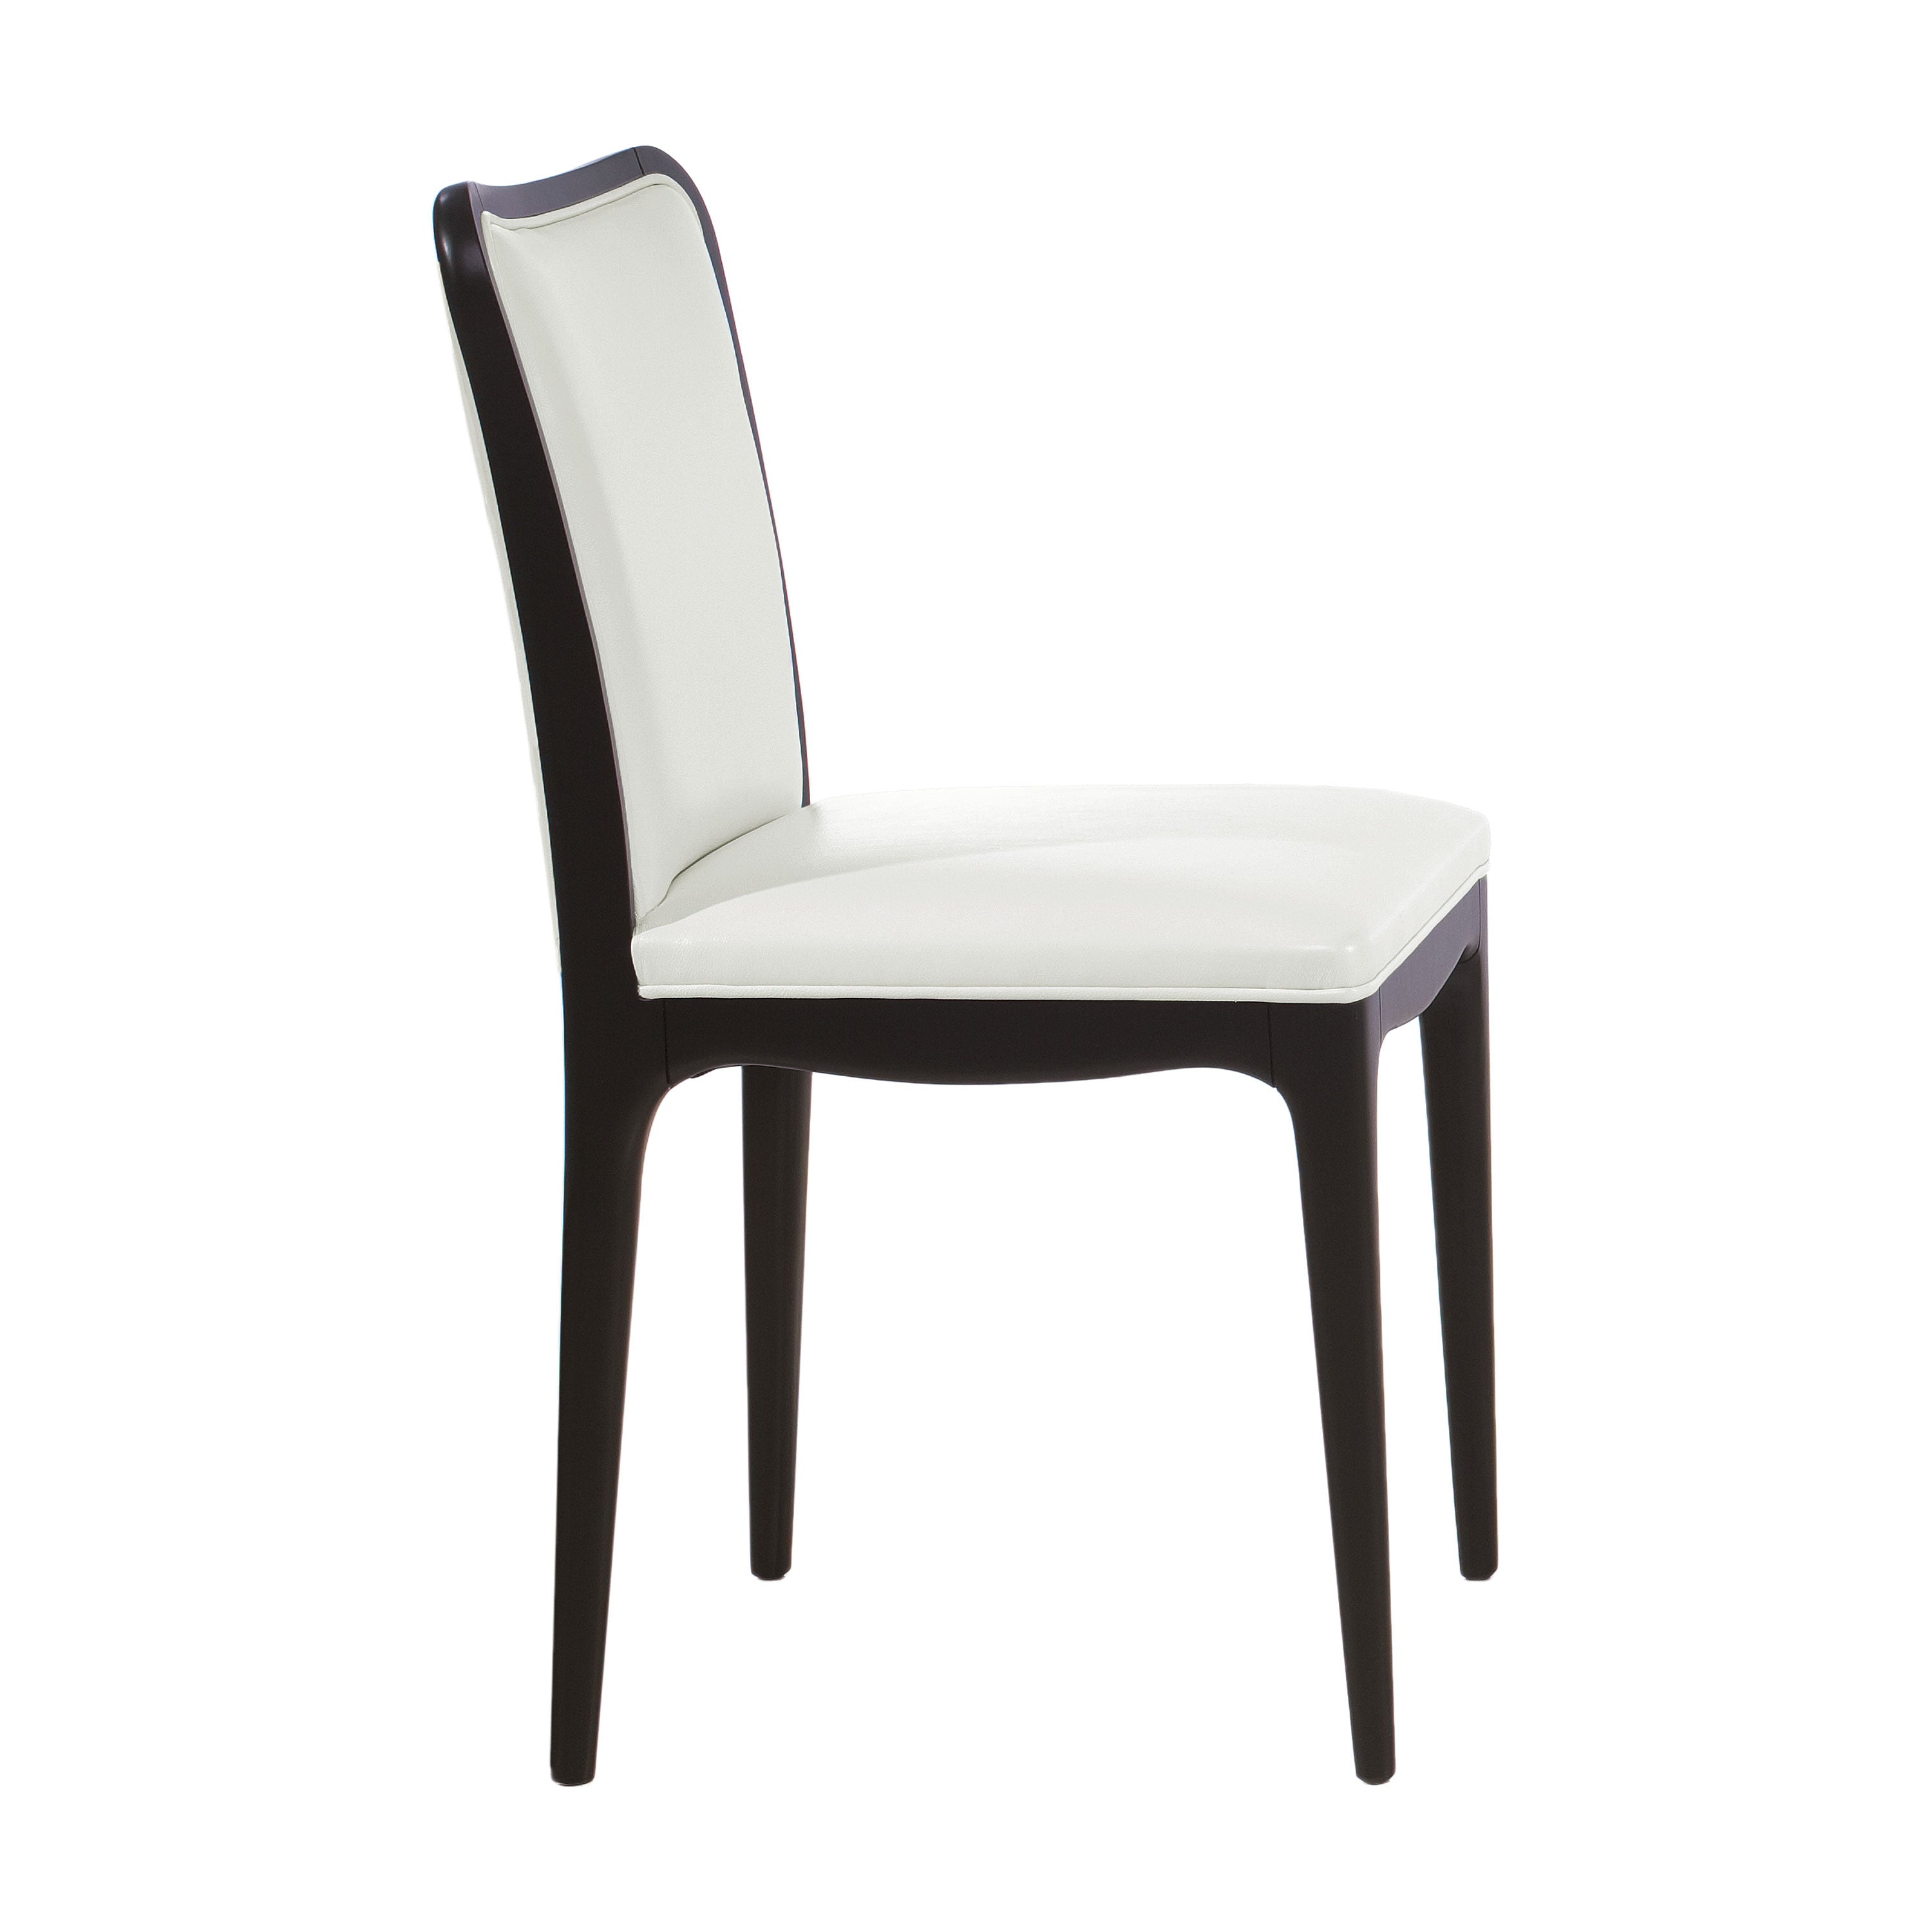 The Curve Bespoke Upholstered Fifties Retro Style Contemporary Dining Chair MS98S Custom Made To Order